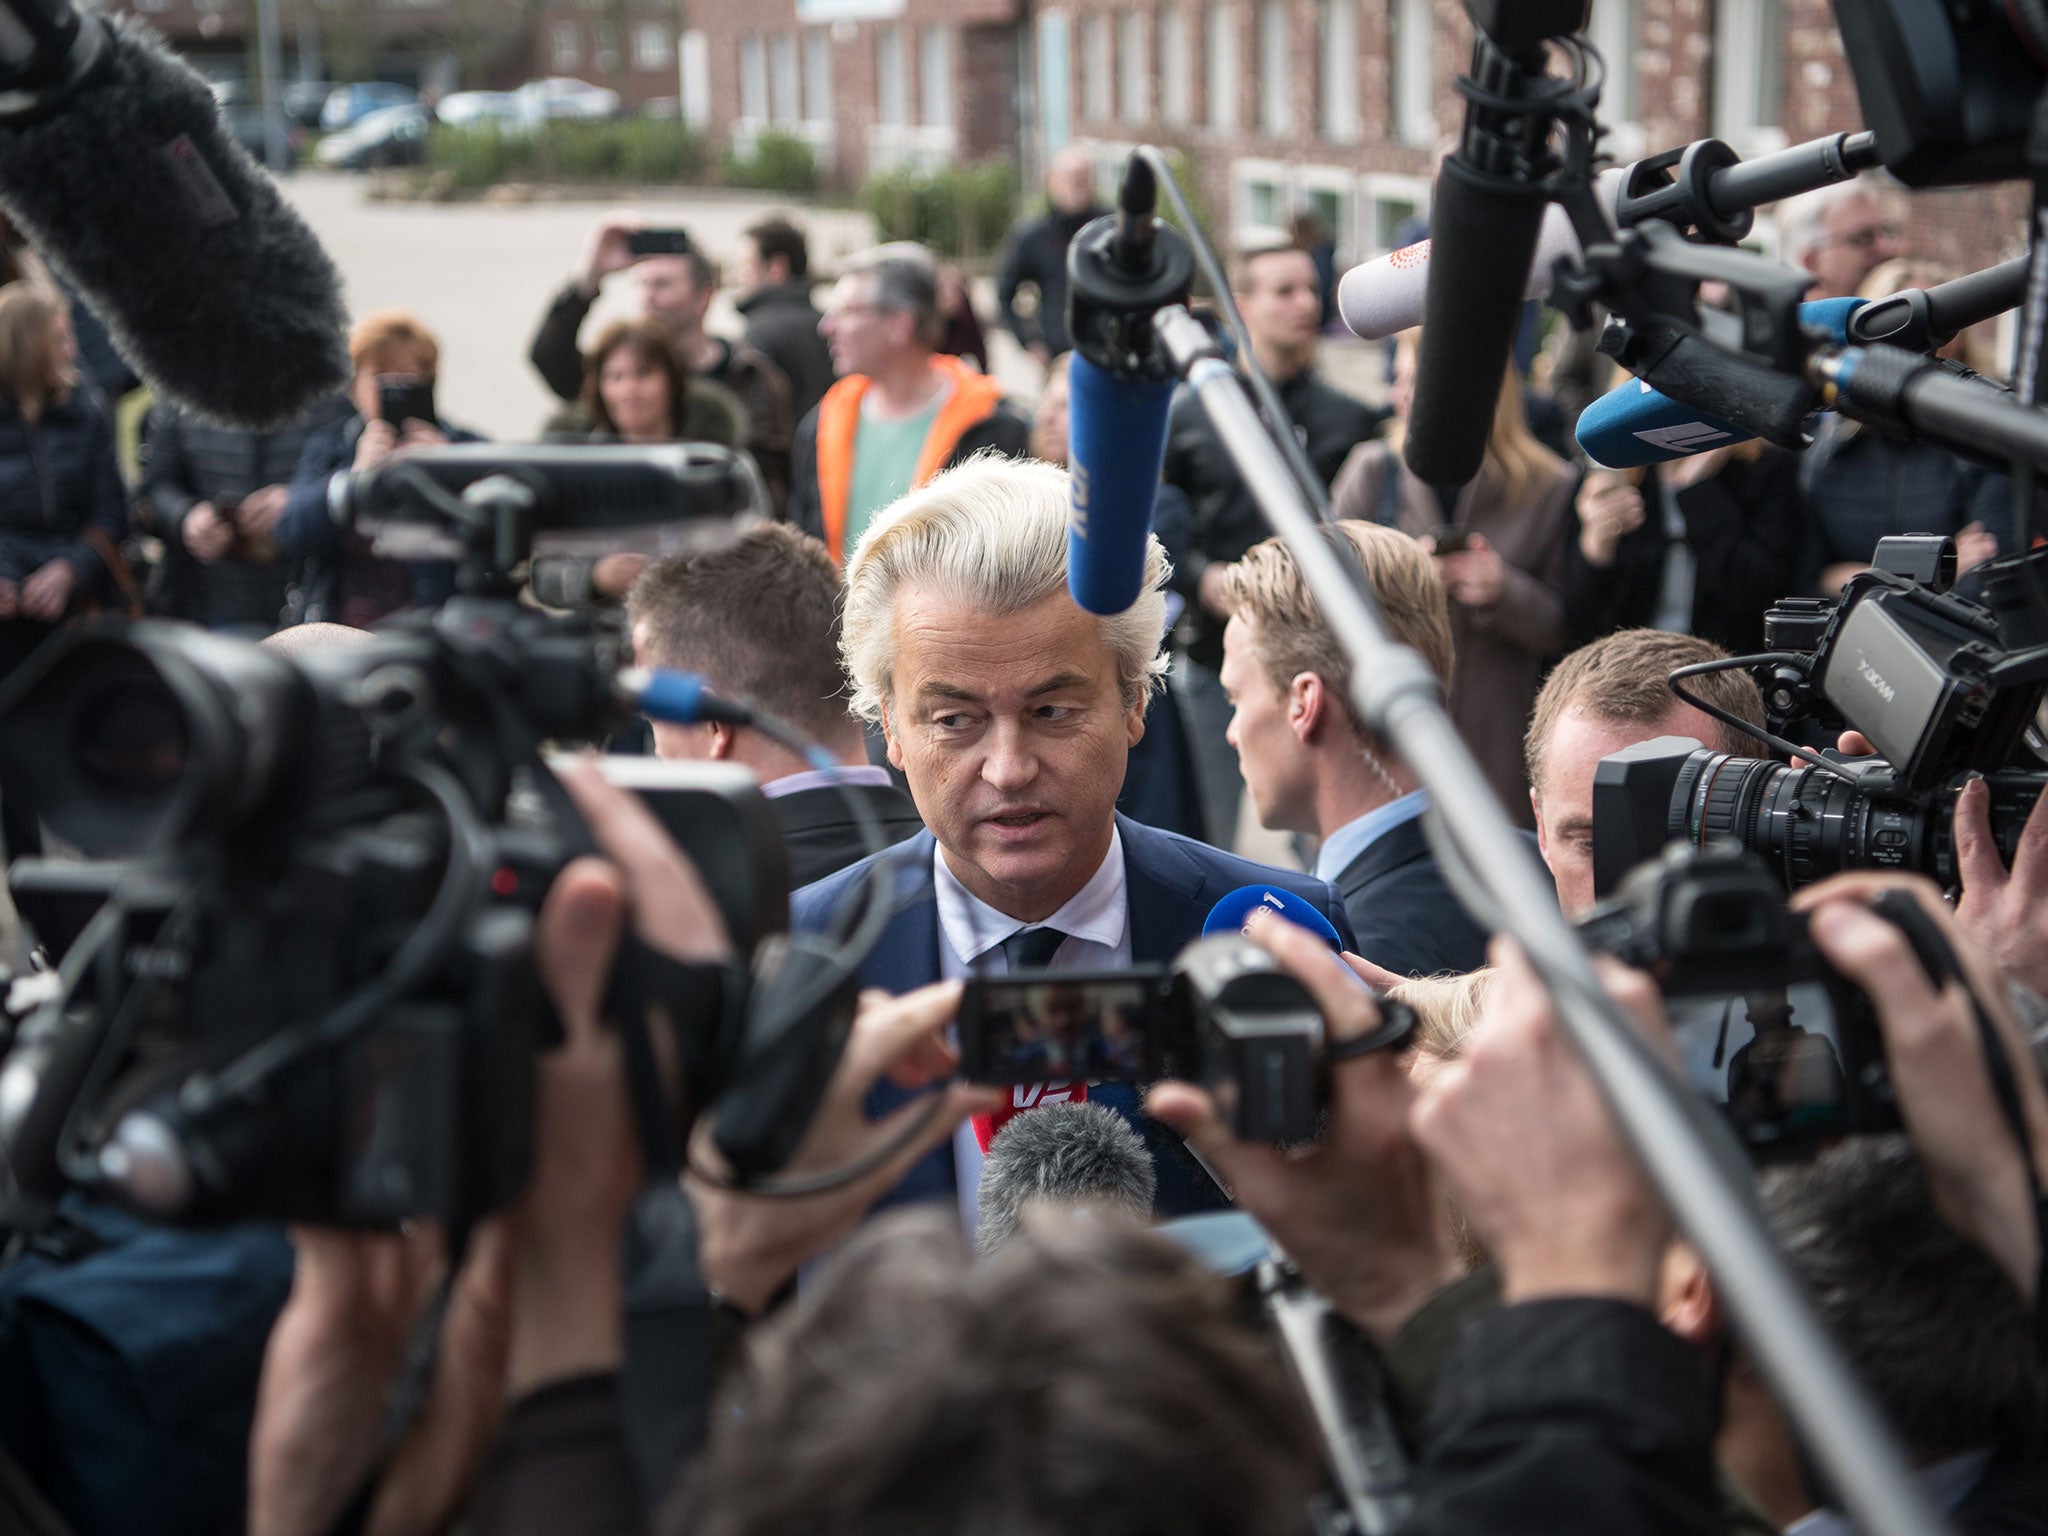 Geert Wilders speaks to the media after casting his vote during the Dutch general election, on 15 March, 2017 in The Hague